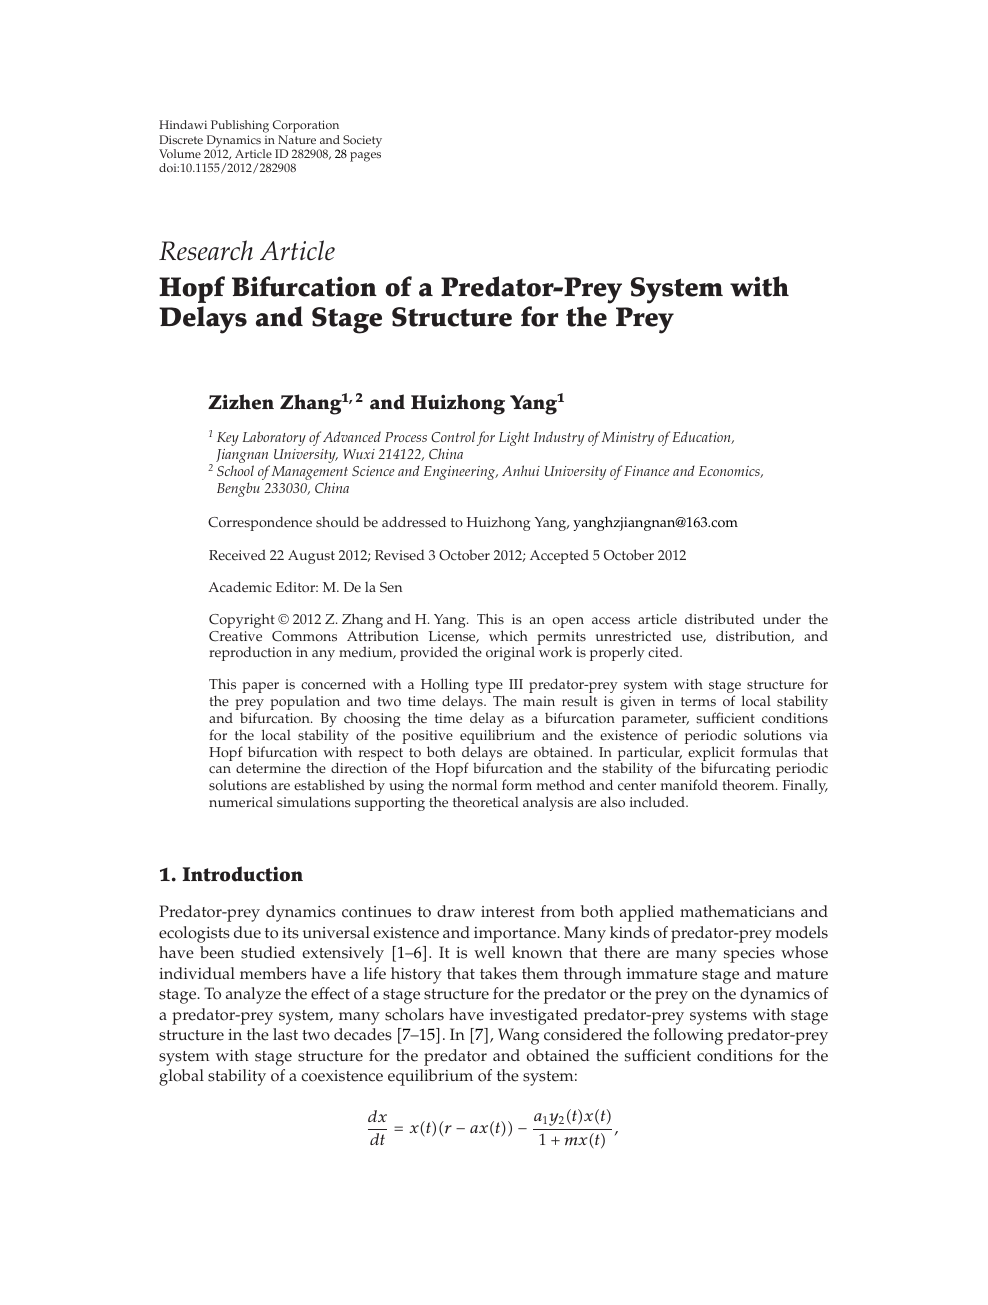 Hopf Bifurcation Of A Predator Prey System With Delays And Stage Structure For The Prey Topic Of Research Paper In Mathematics Download Scholarly Article Pdf And Read For Free On Cyberleninka Open